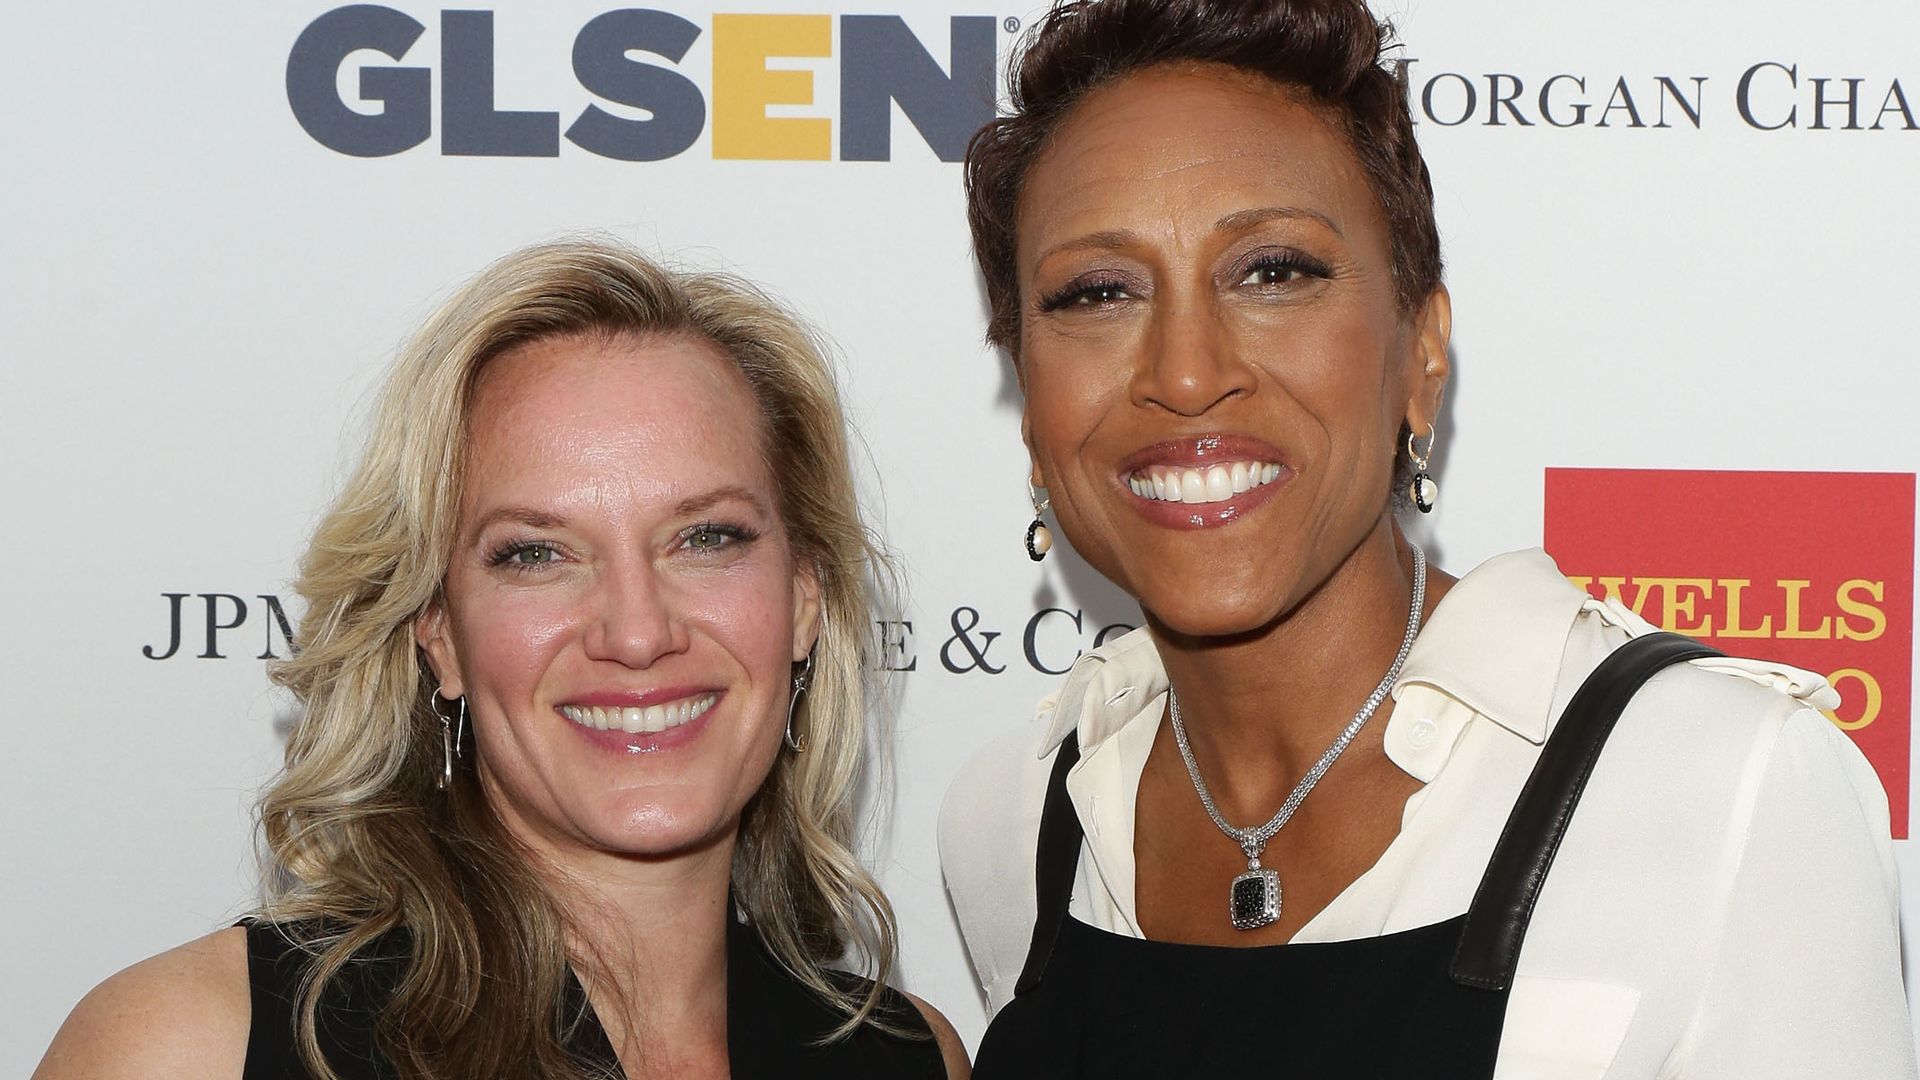 Robin Roberts and Amber Laign smiling